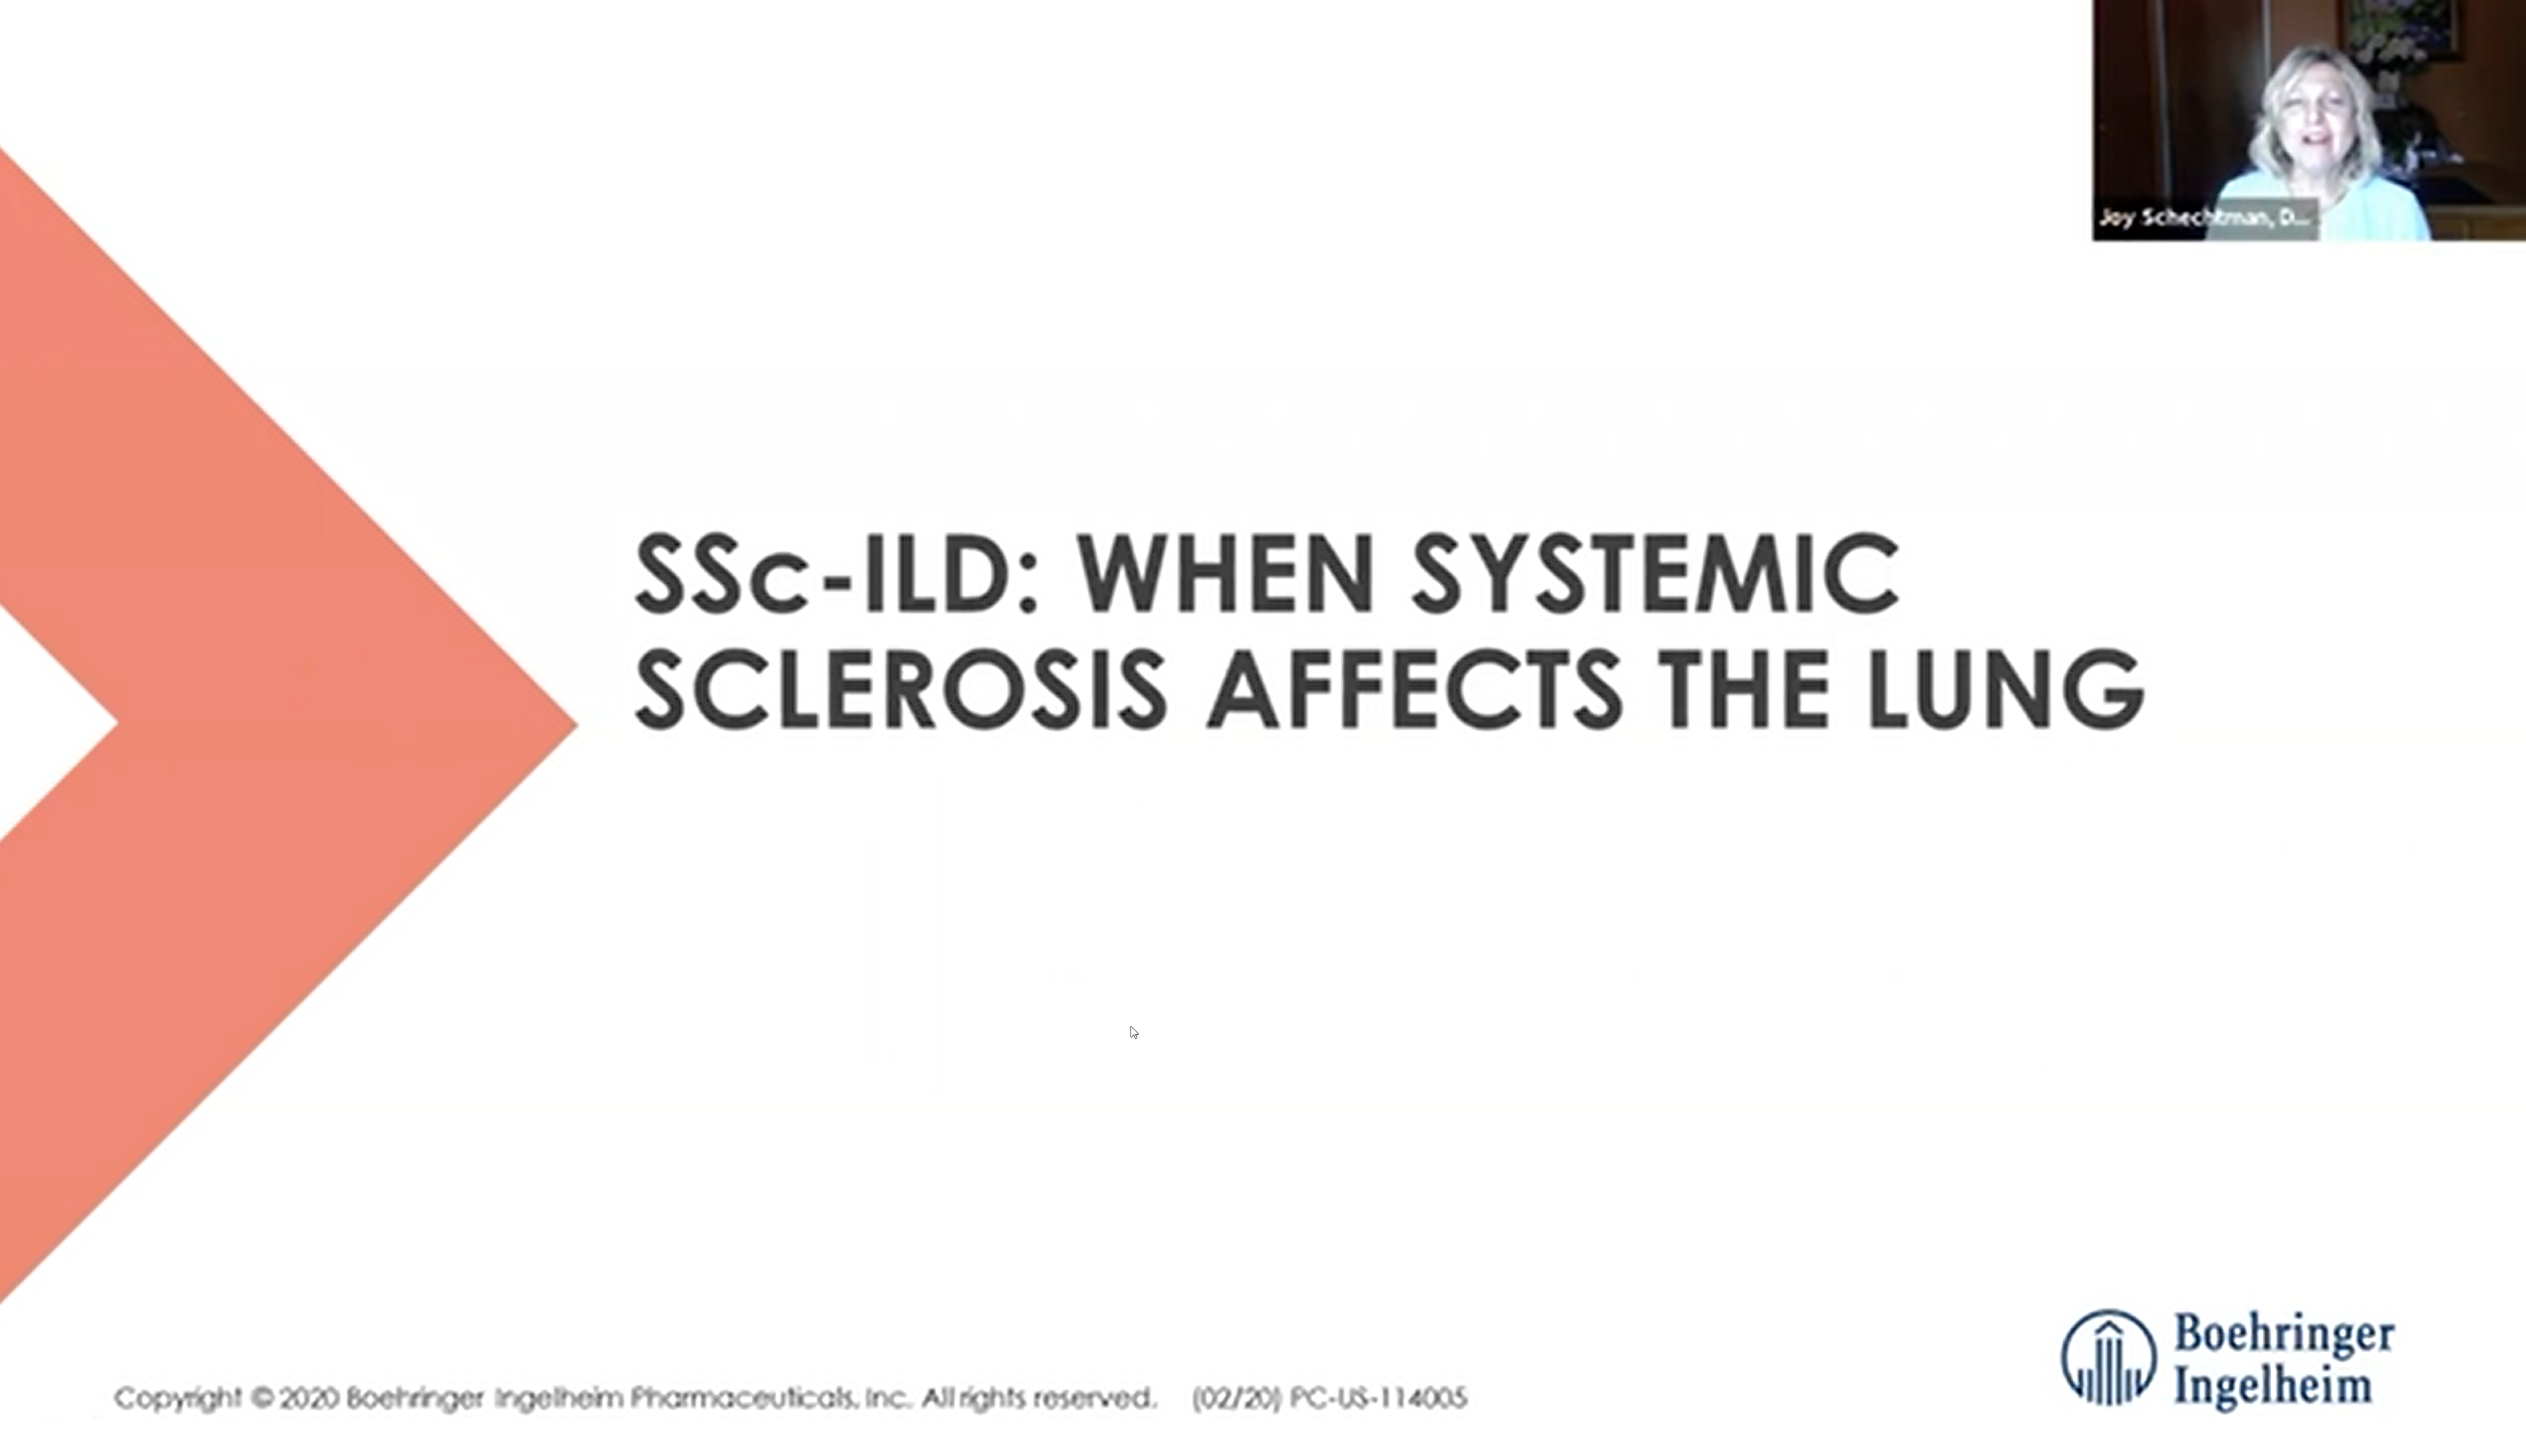 SSc-ILD: When Systemic Sclerosis Affects the Lung